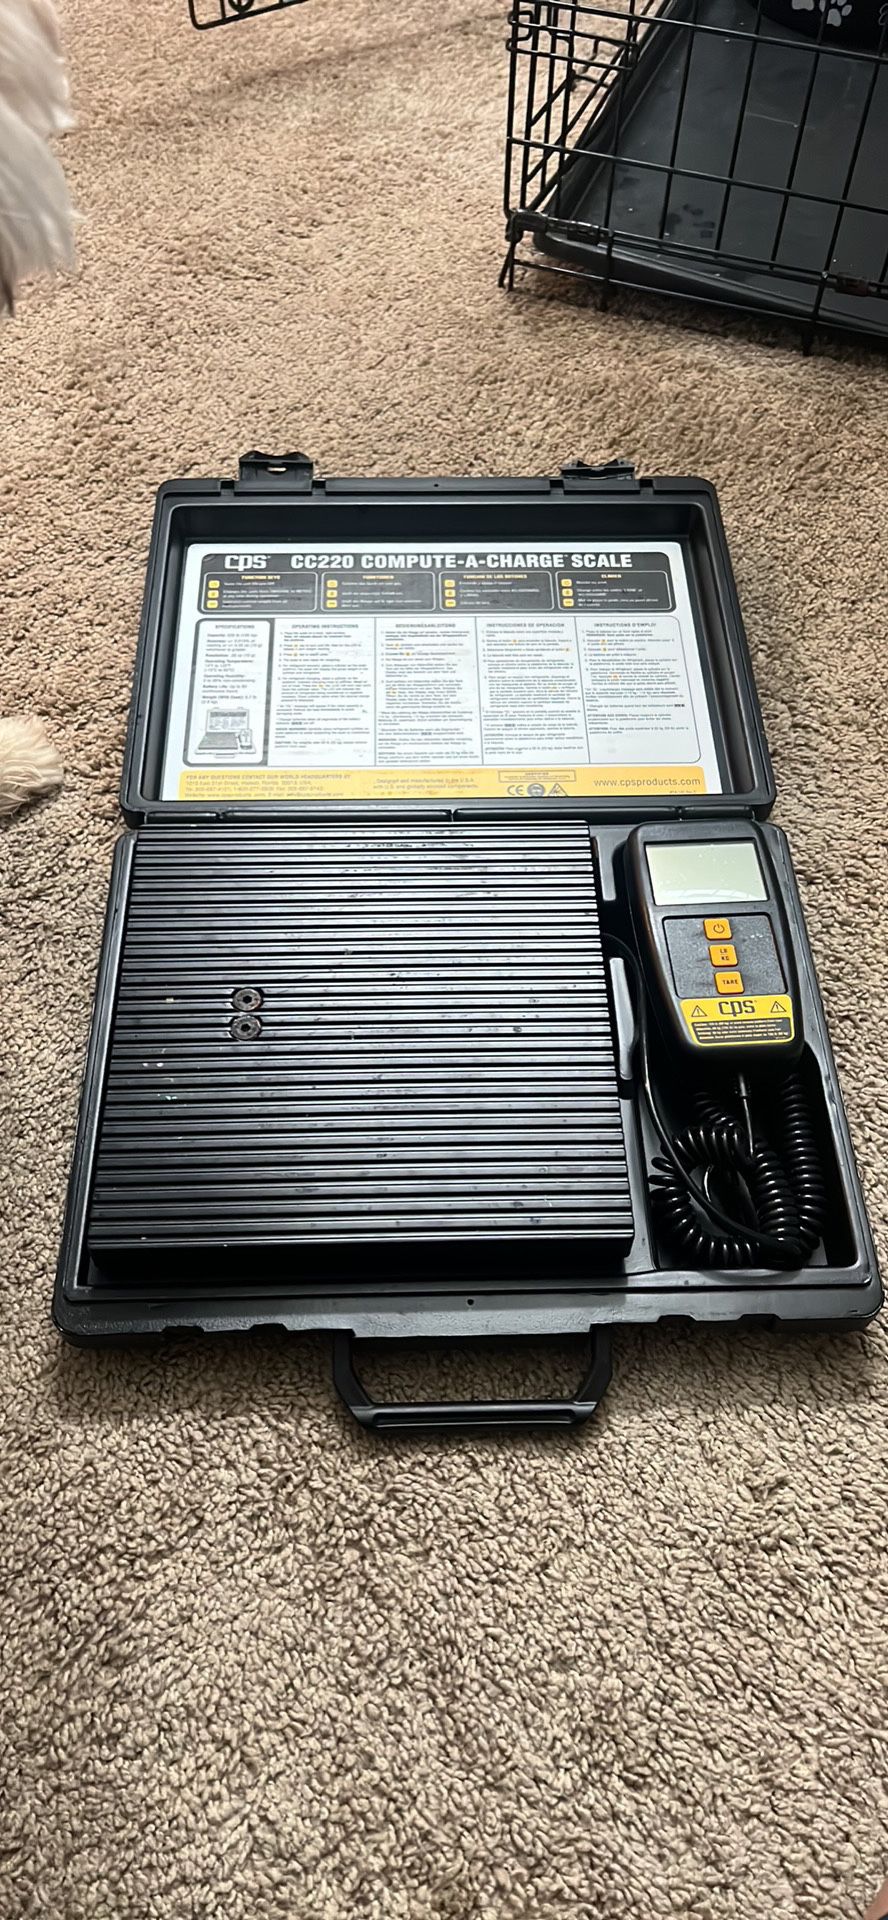 CPS REFRIGERANT SCALE